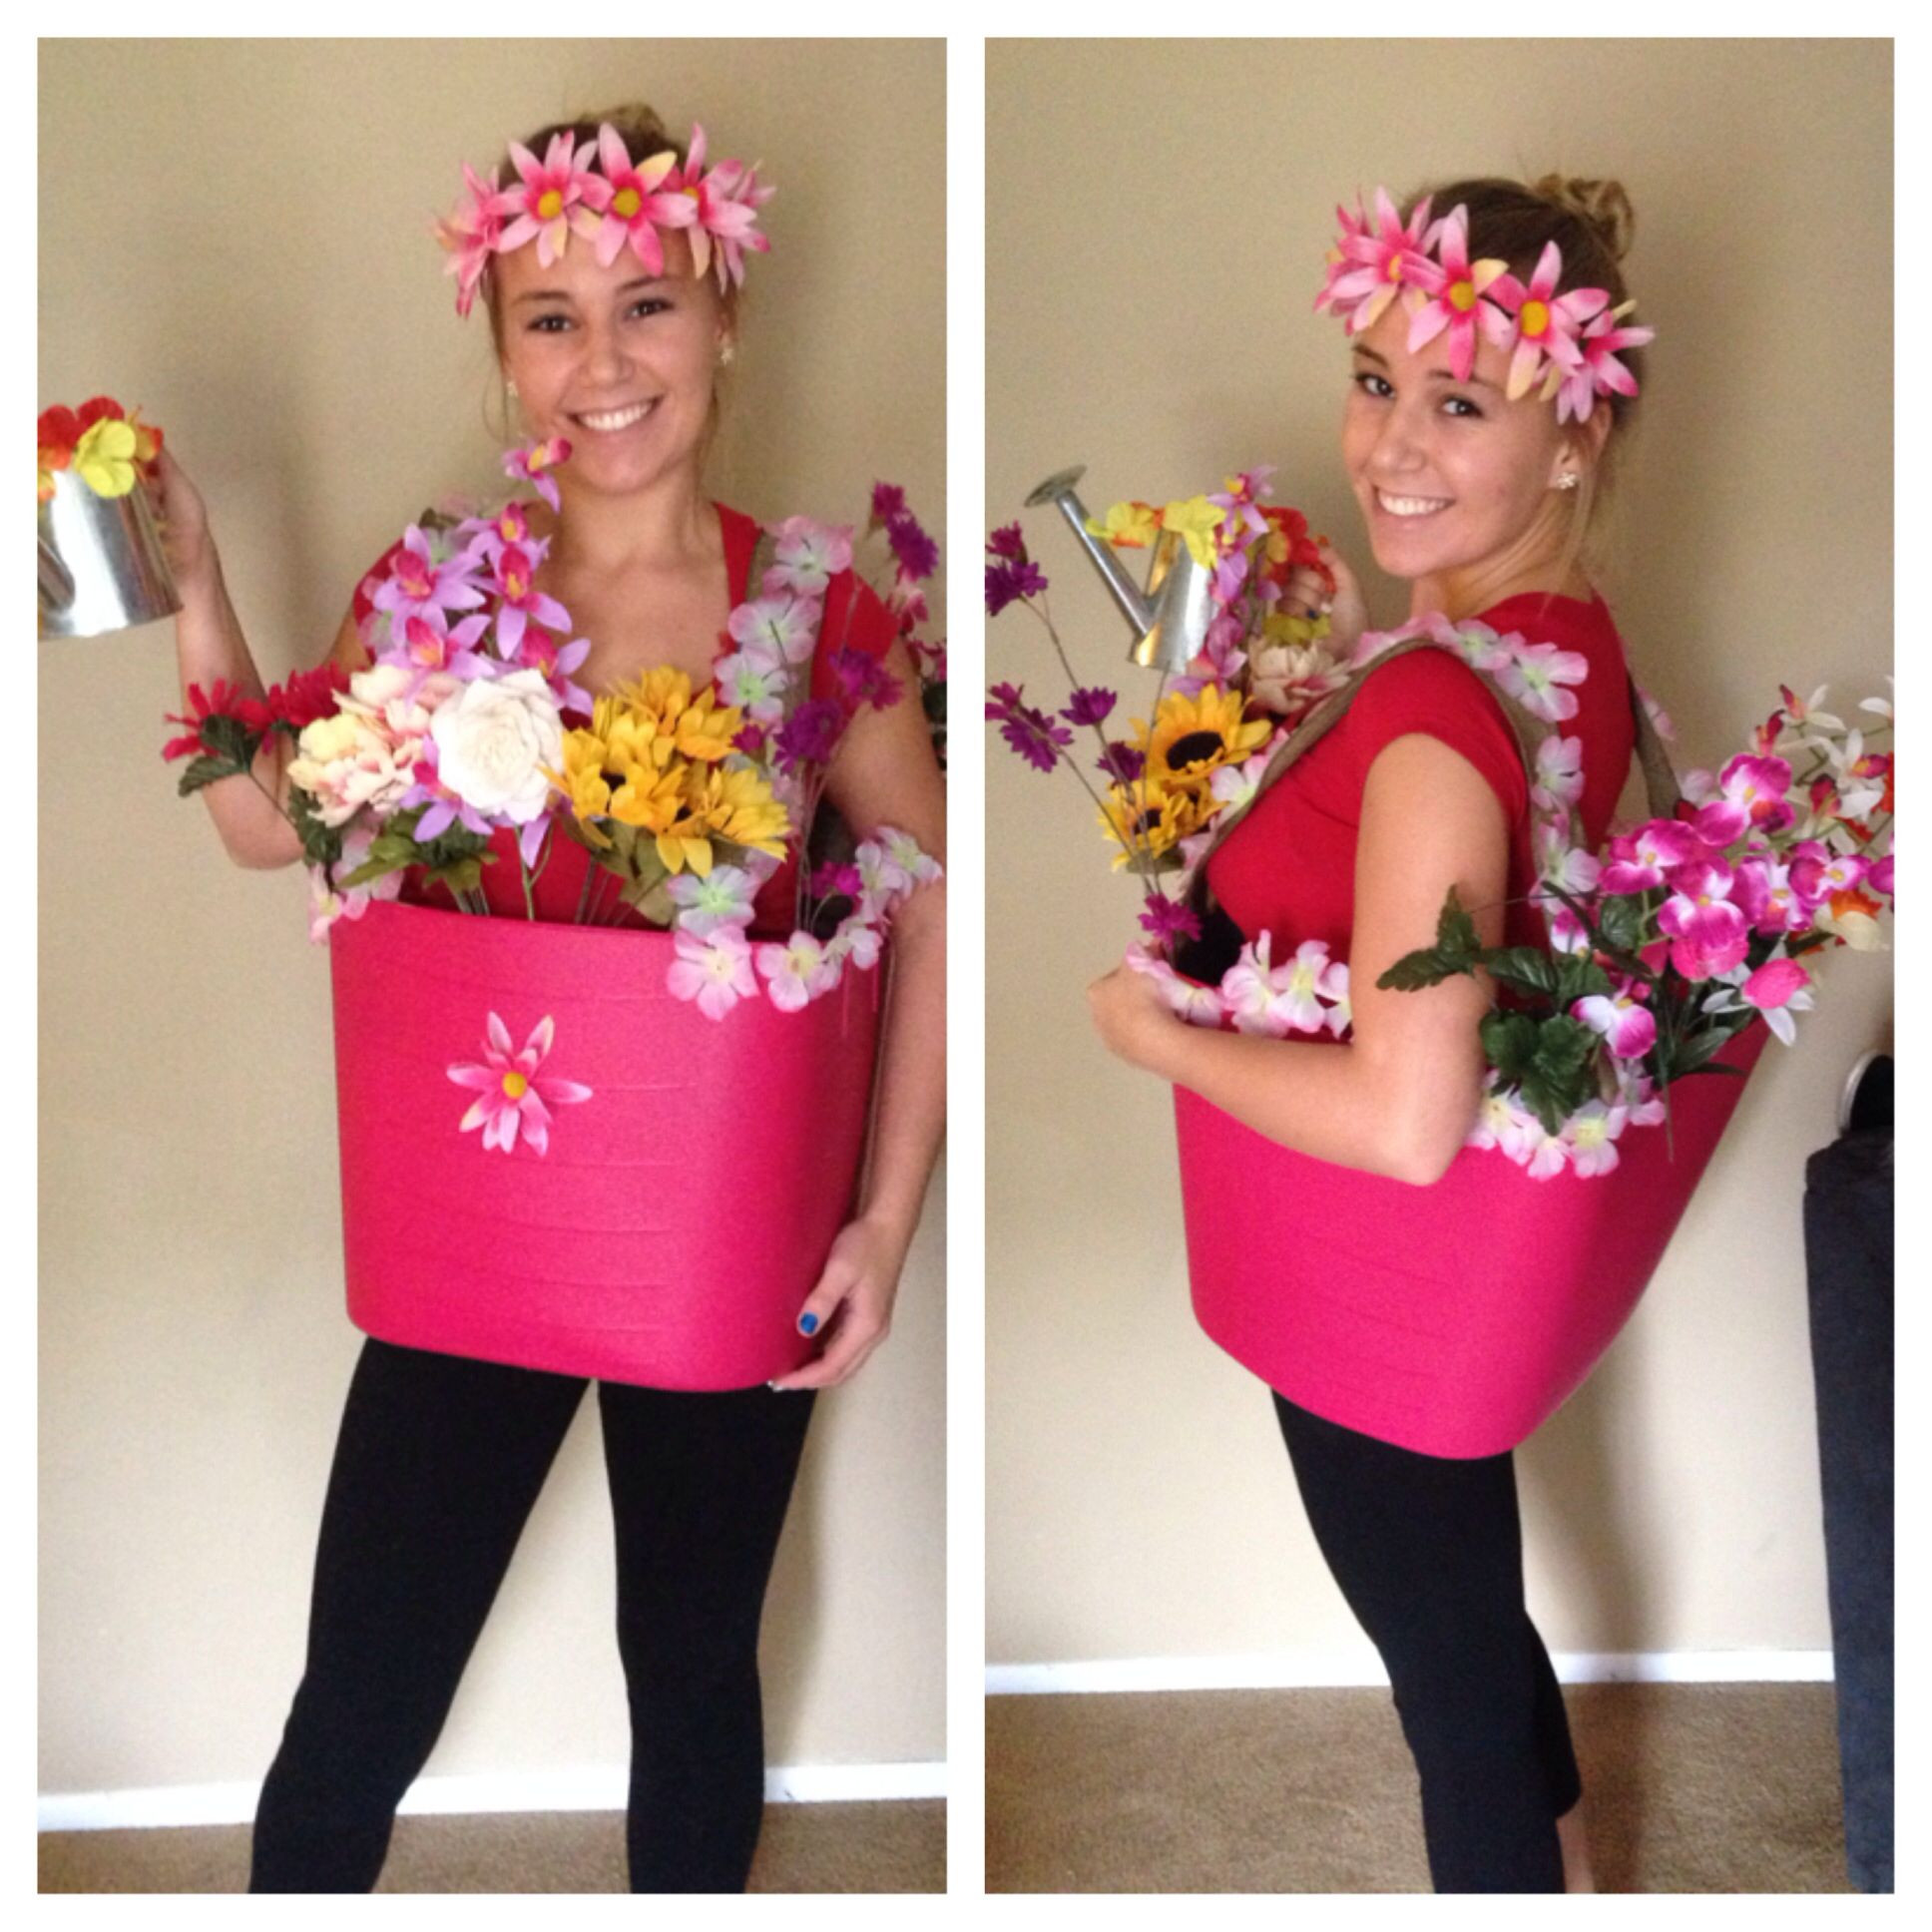 Flower Halloween Costume For Adults
 Homemade DIY Halloween flower pot costume Very affordable